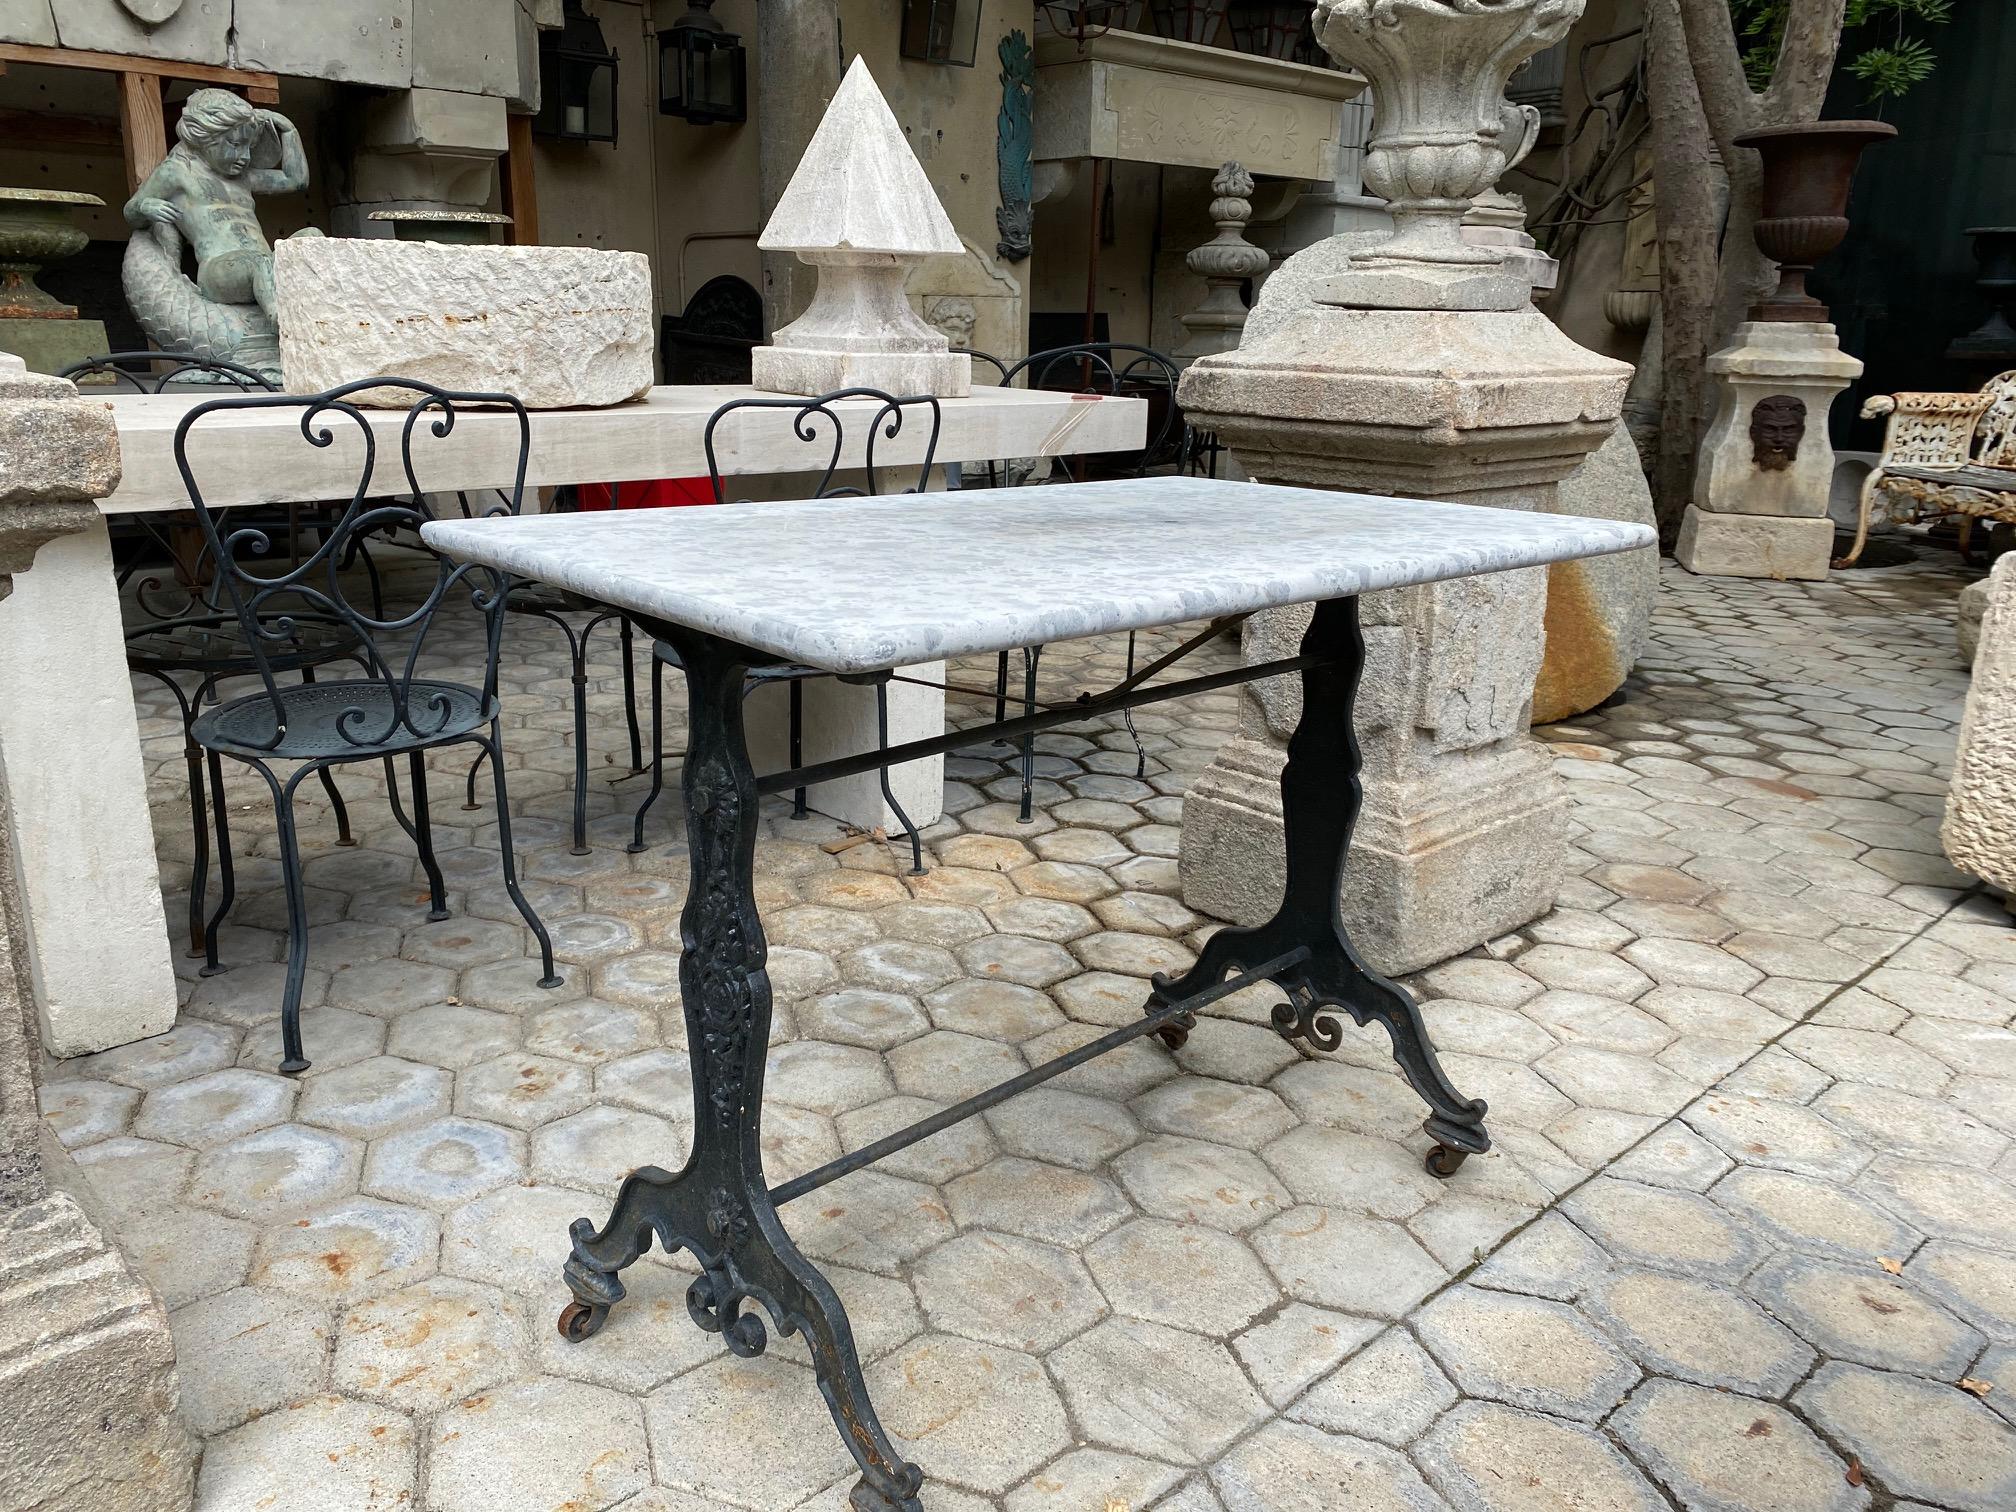 19th century handmade antique garden with original stone marble top and cast iron on casters outdoor indoor table. It will be the perfect touch by an outdoor fireplace as a console, this table has a lot of charm and character. It can work in an old